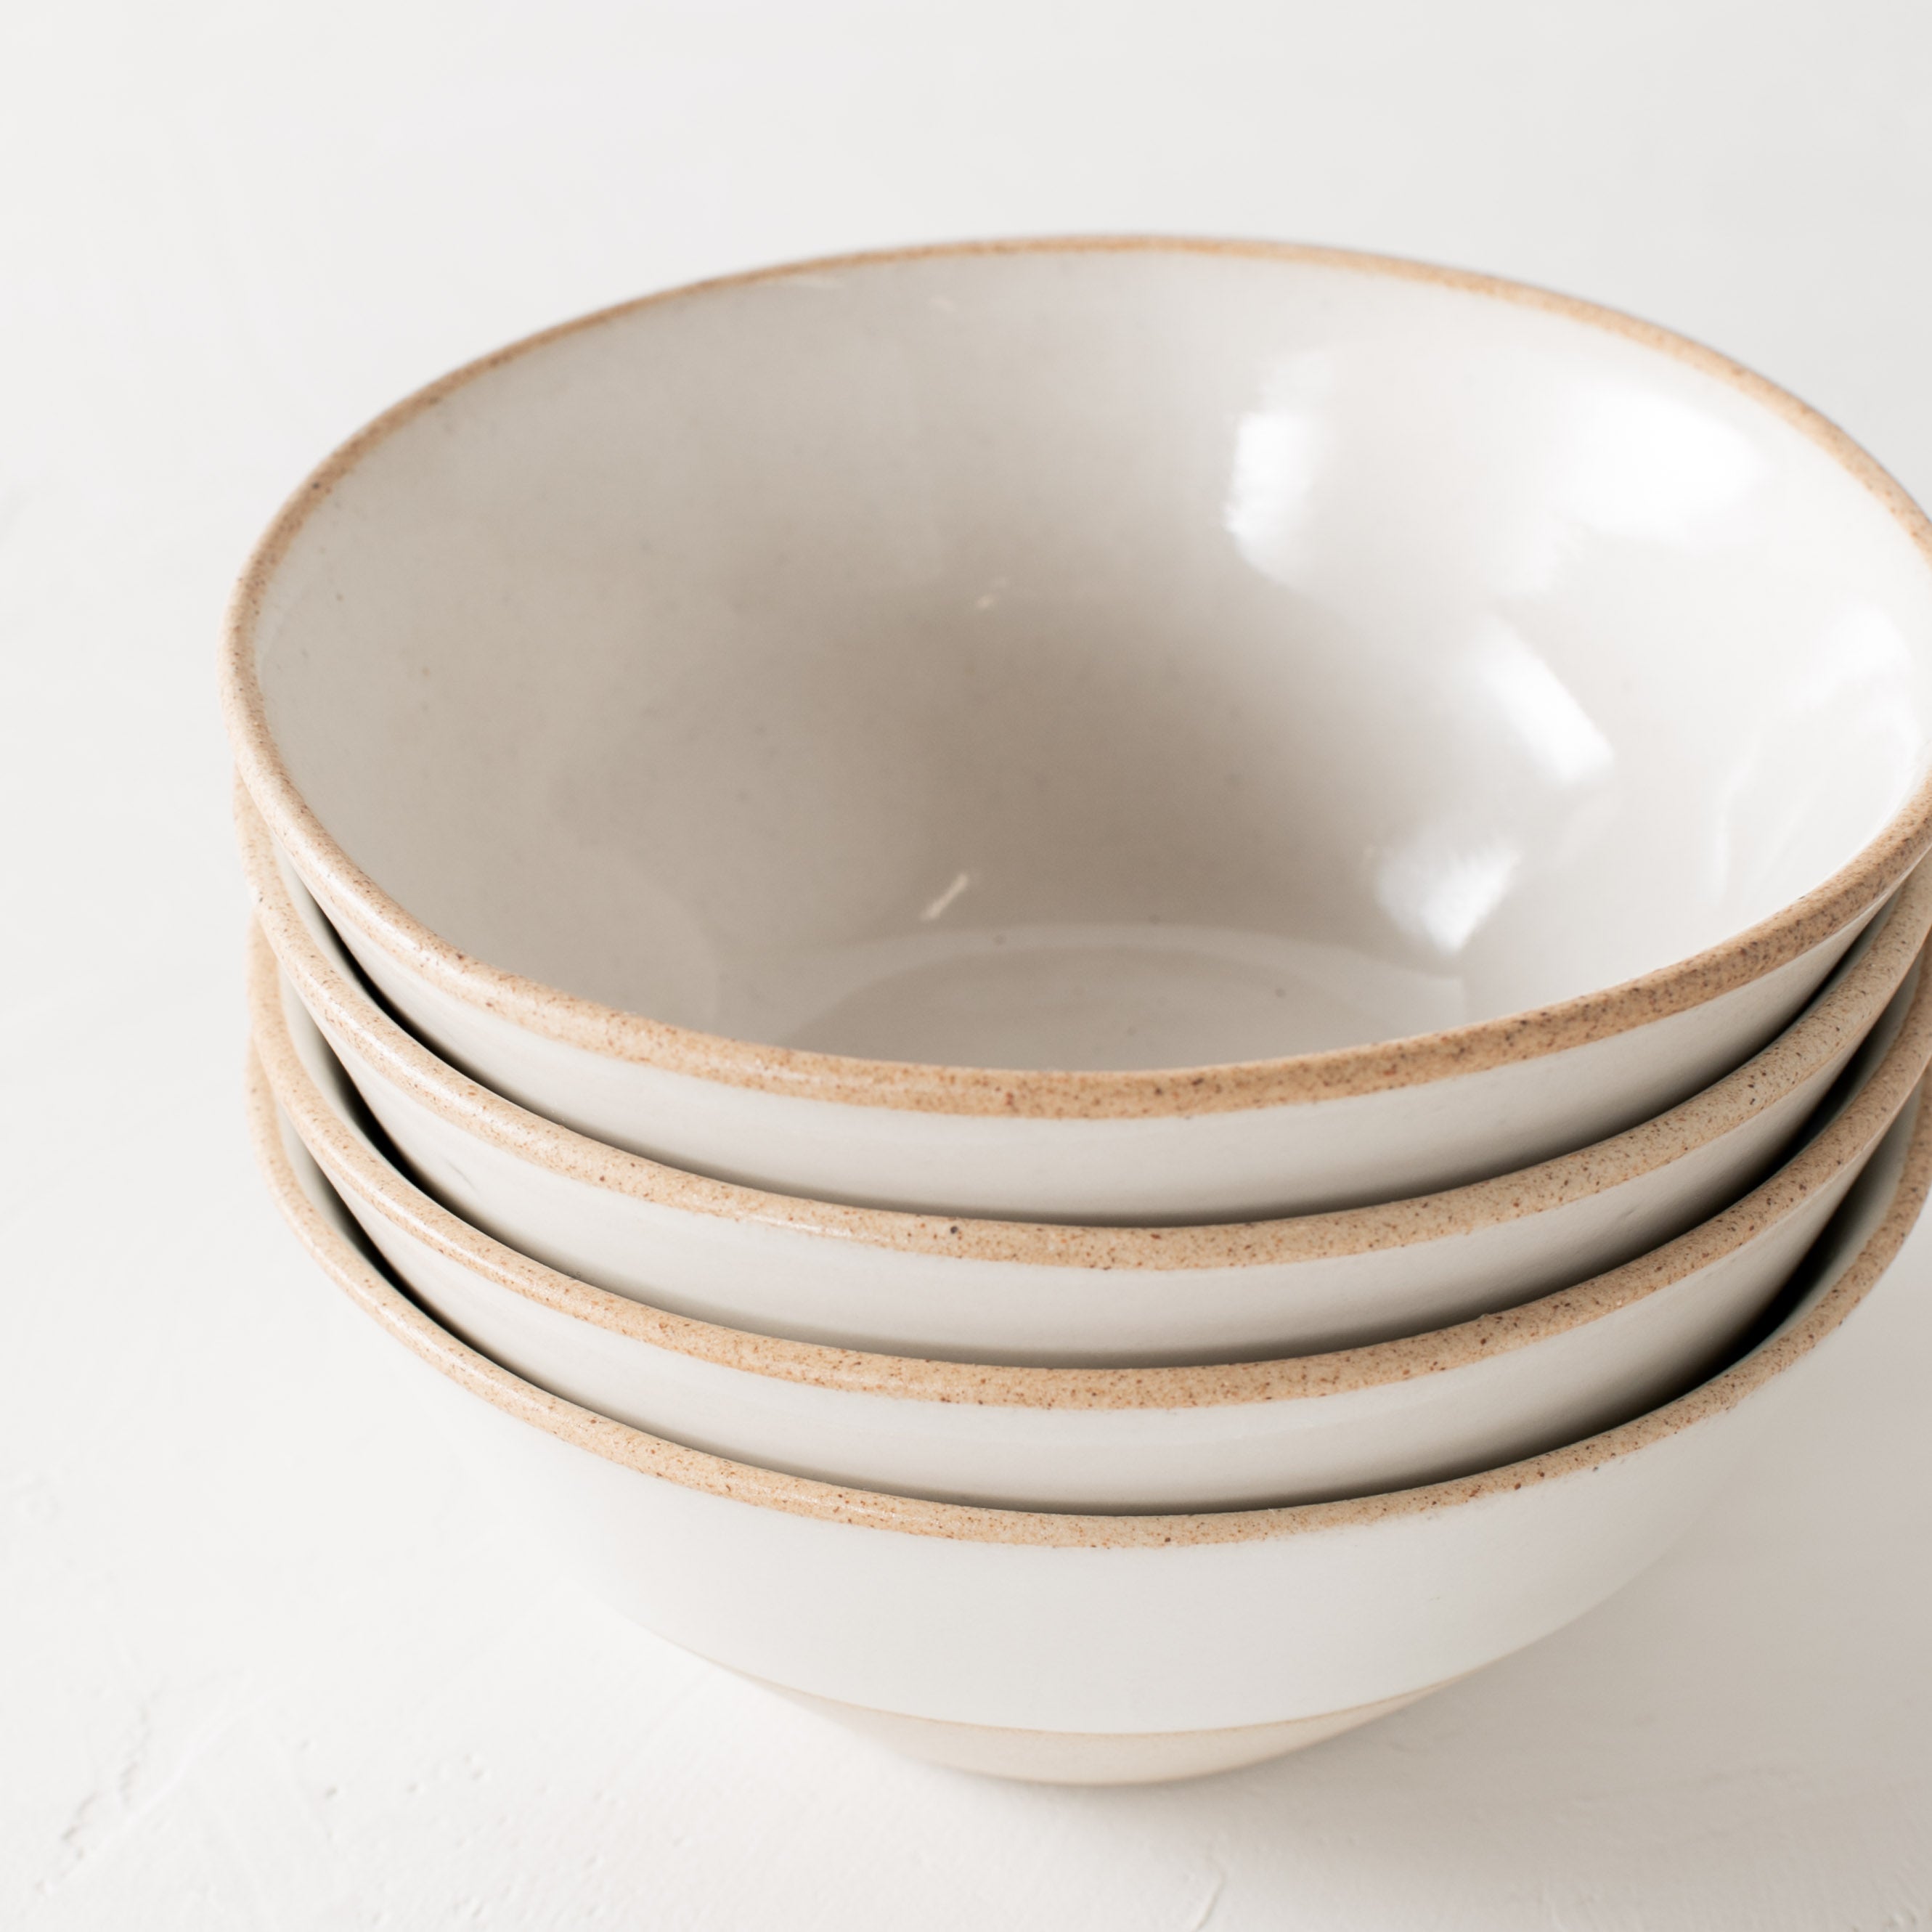 White ceramic bowls. Handmade glazed stoneware bowls, close up of stacked together in a group of four. Bowls have exposed stoneware rims as well as bases. Centered in the image staged against a white textured wall and table top. Designed and sold by Convivial Production, Kansas City Ceramics.